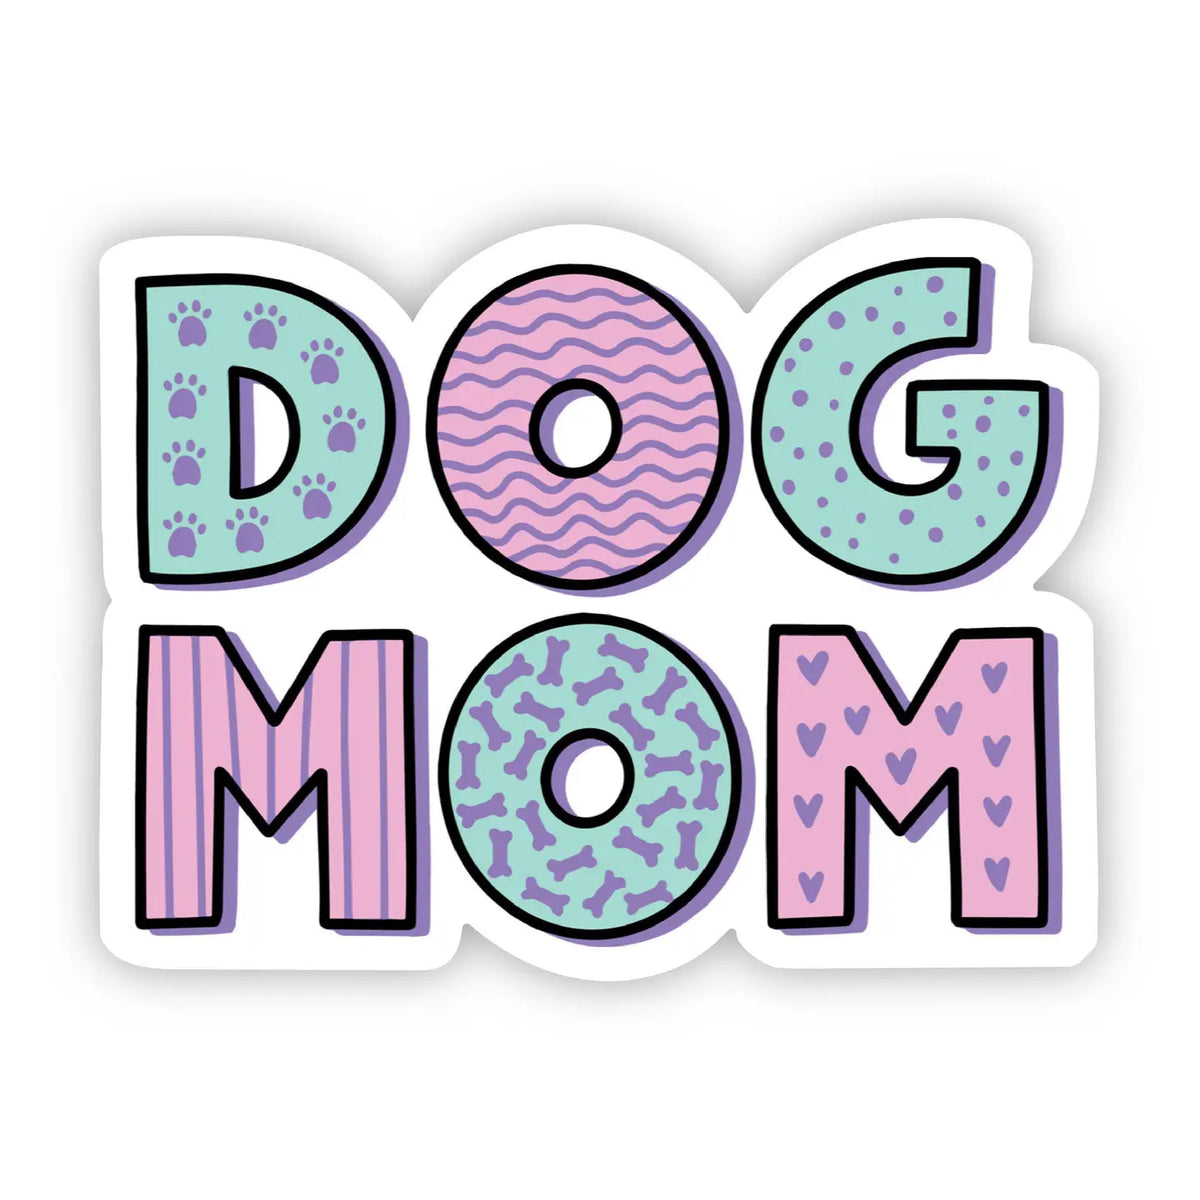 dog mom sticker in pink, light purple, and mint colors